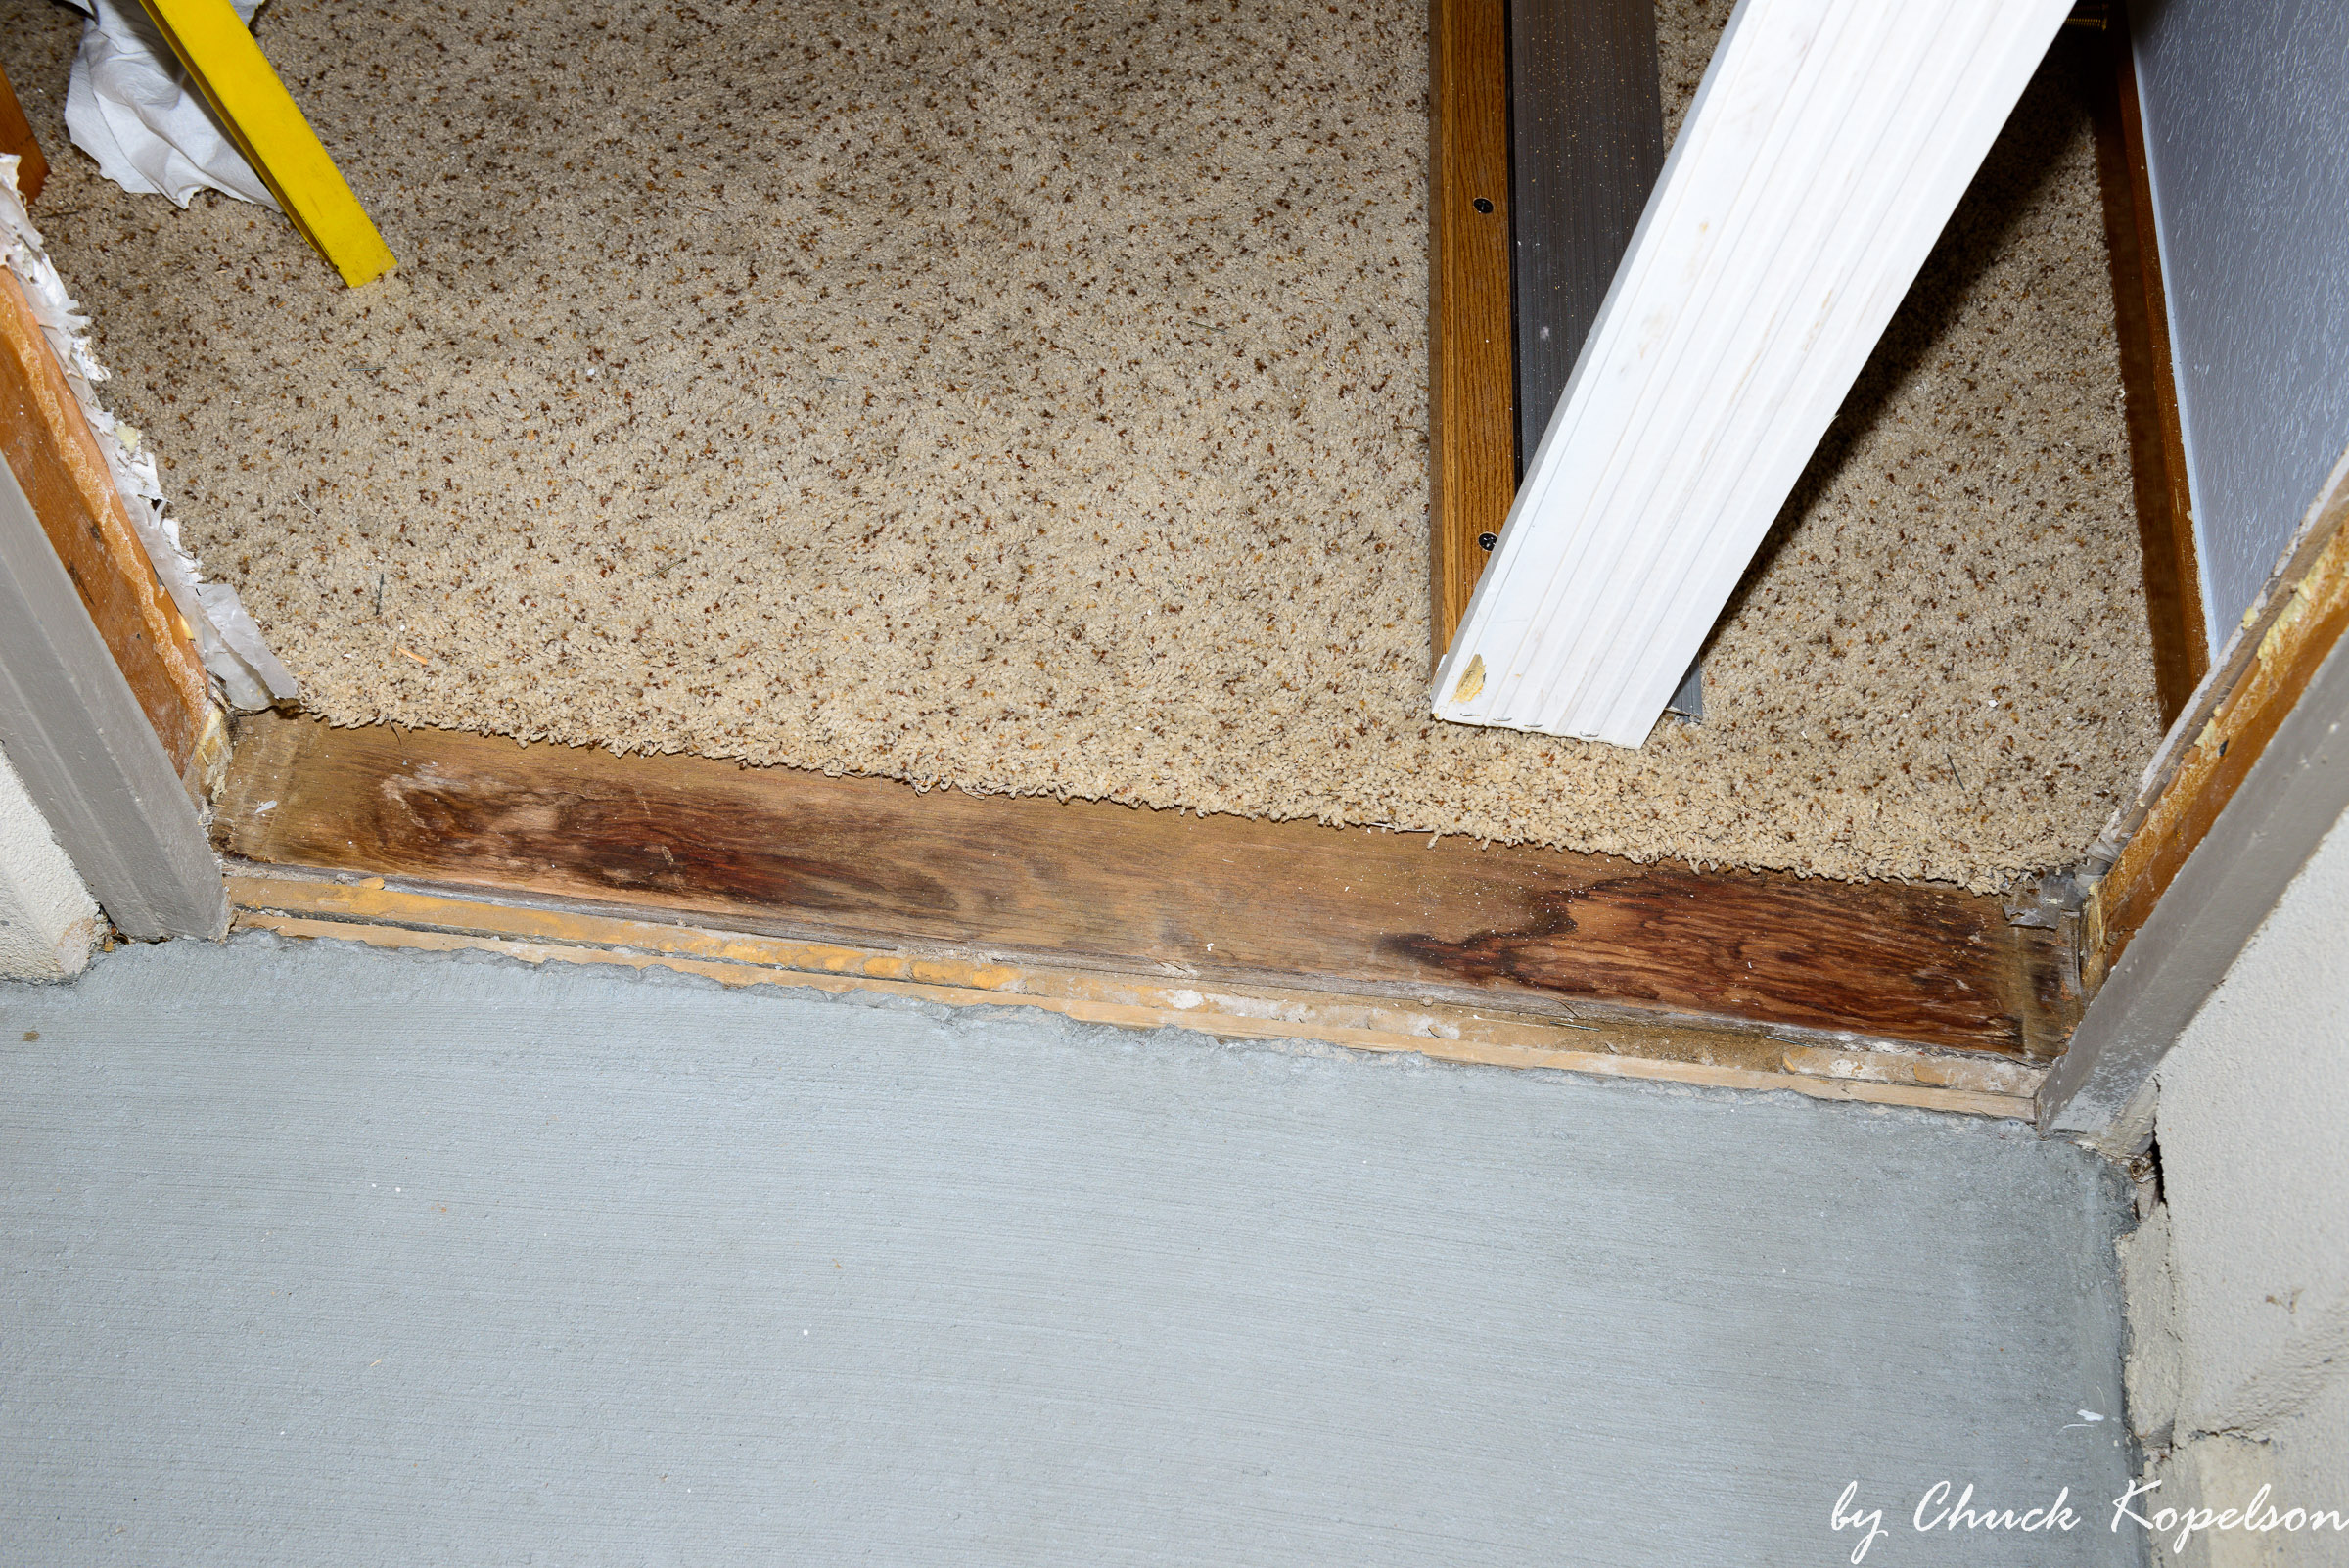 The plywood decking of the room has seen some water over the years.